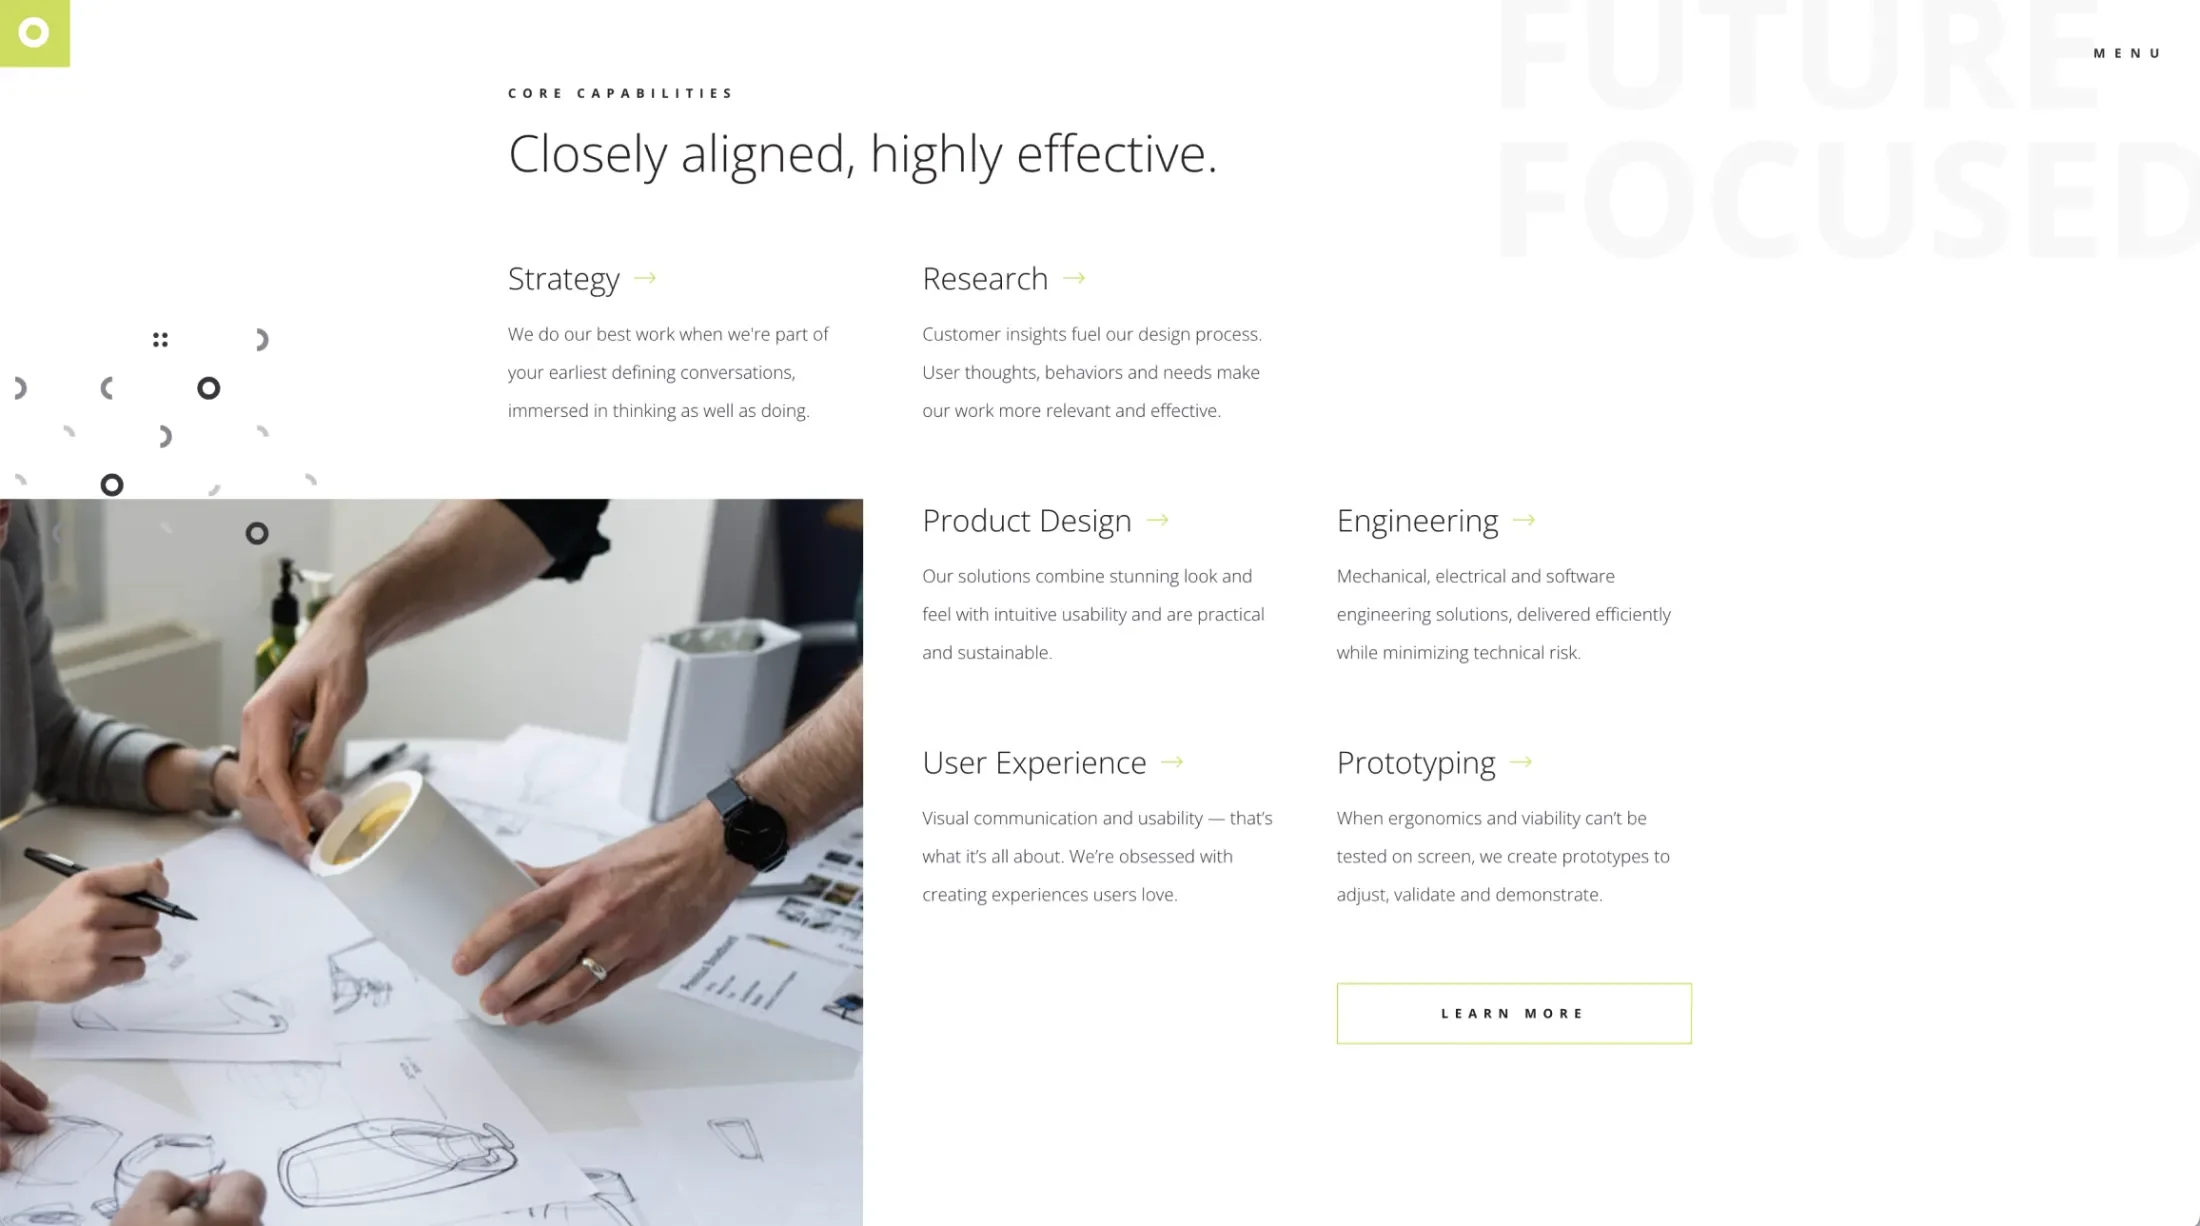 Design Central webpage for core capabilities titled "Closely aligned, highly effective" outlining strategy, research, product design, engineering, user experience and prototyping